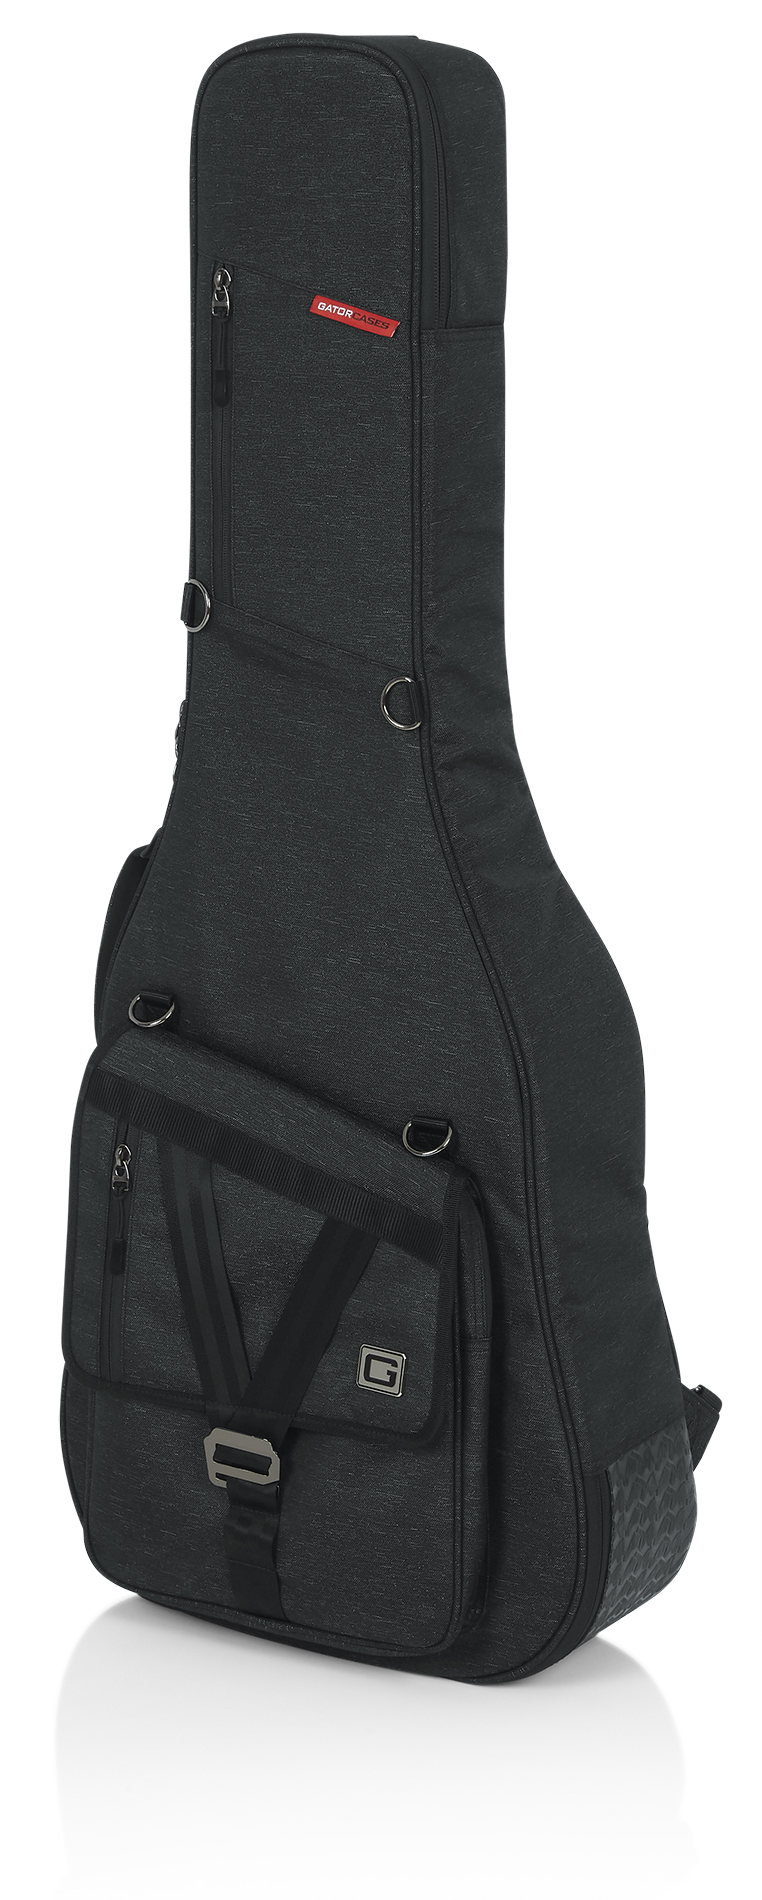 Black Gt Bag For Reso, 00 & Classical Guitars-GT-RES00CLASS-BLK